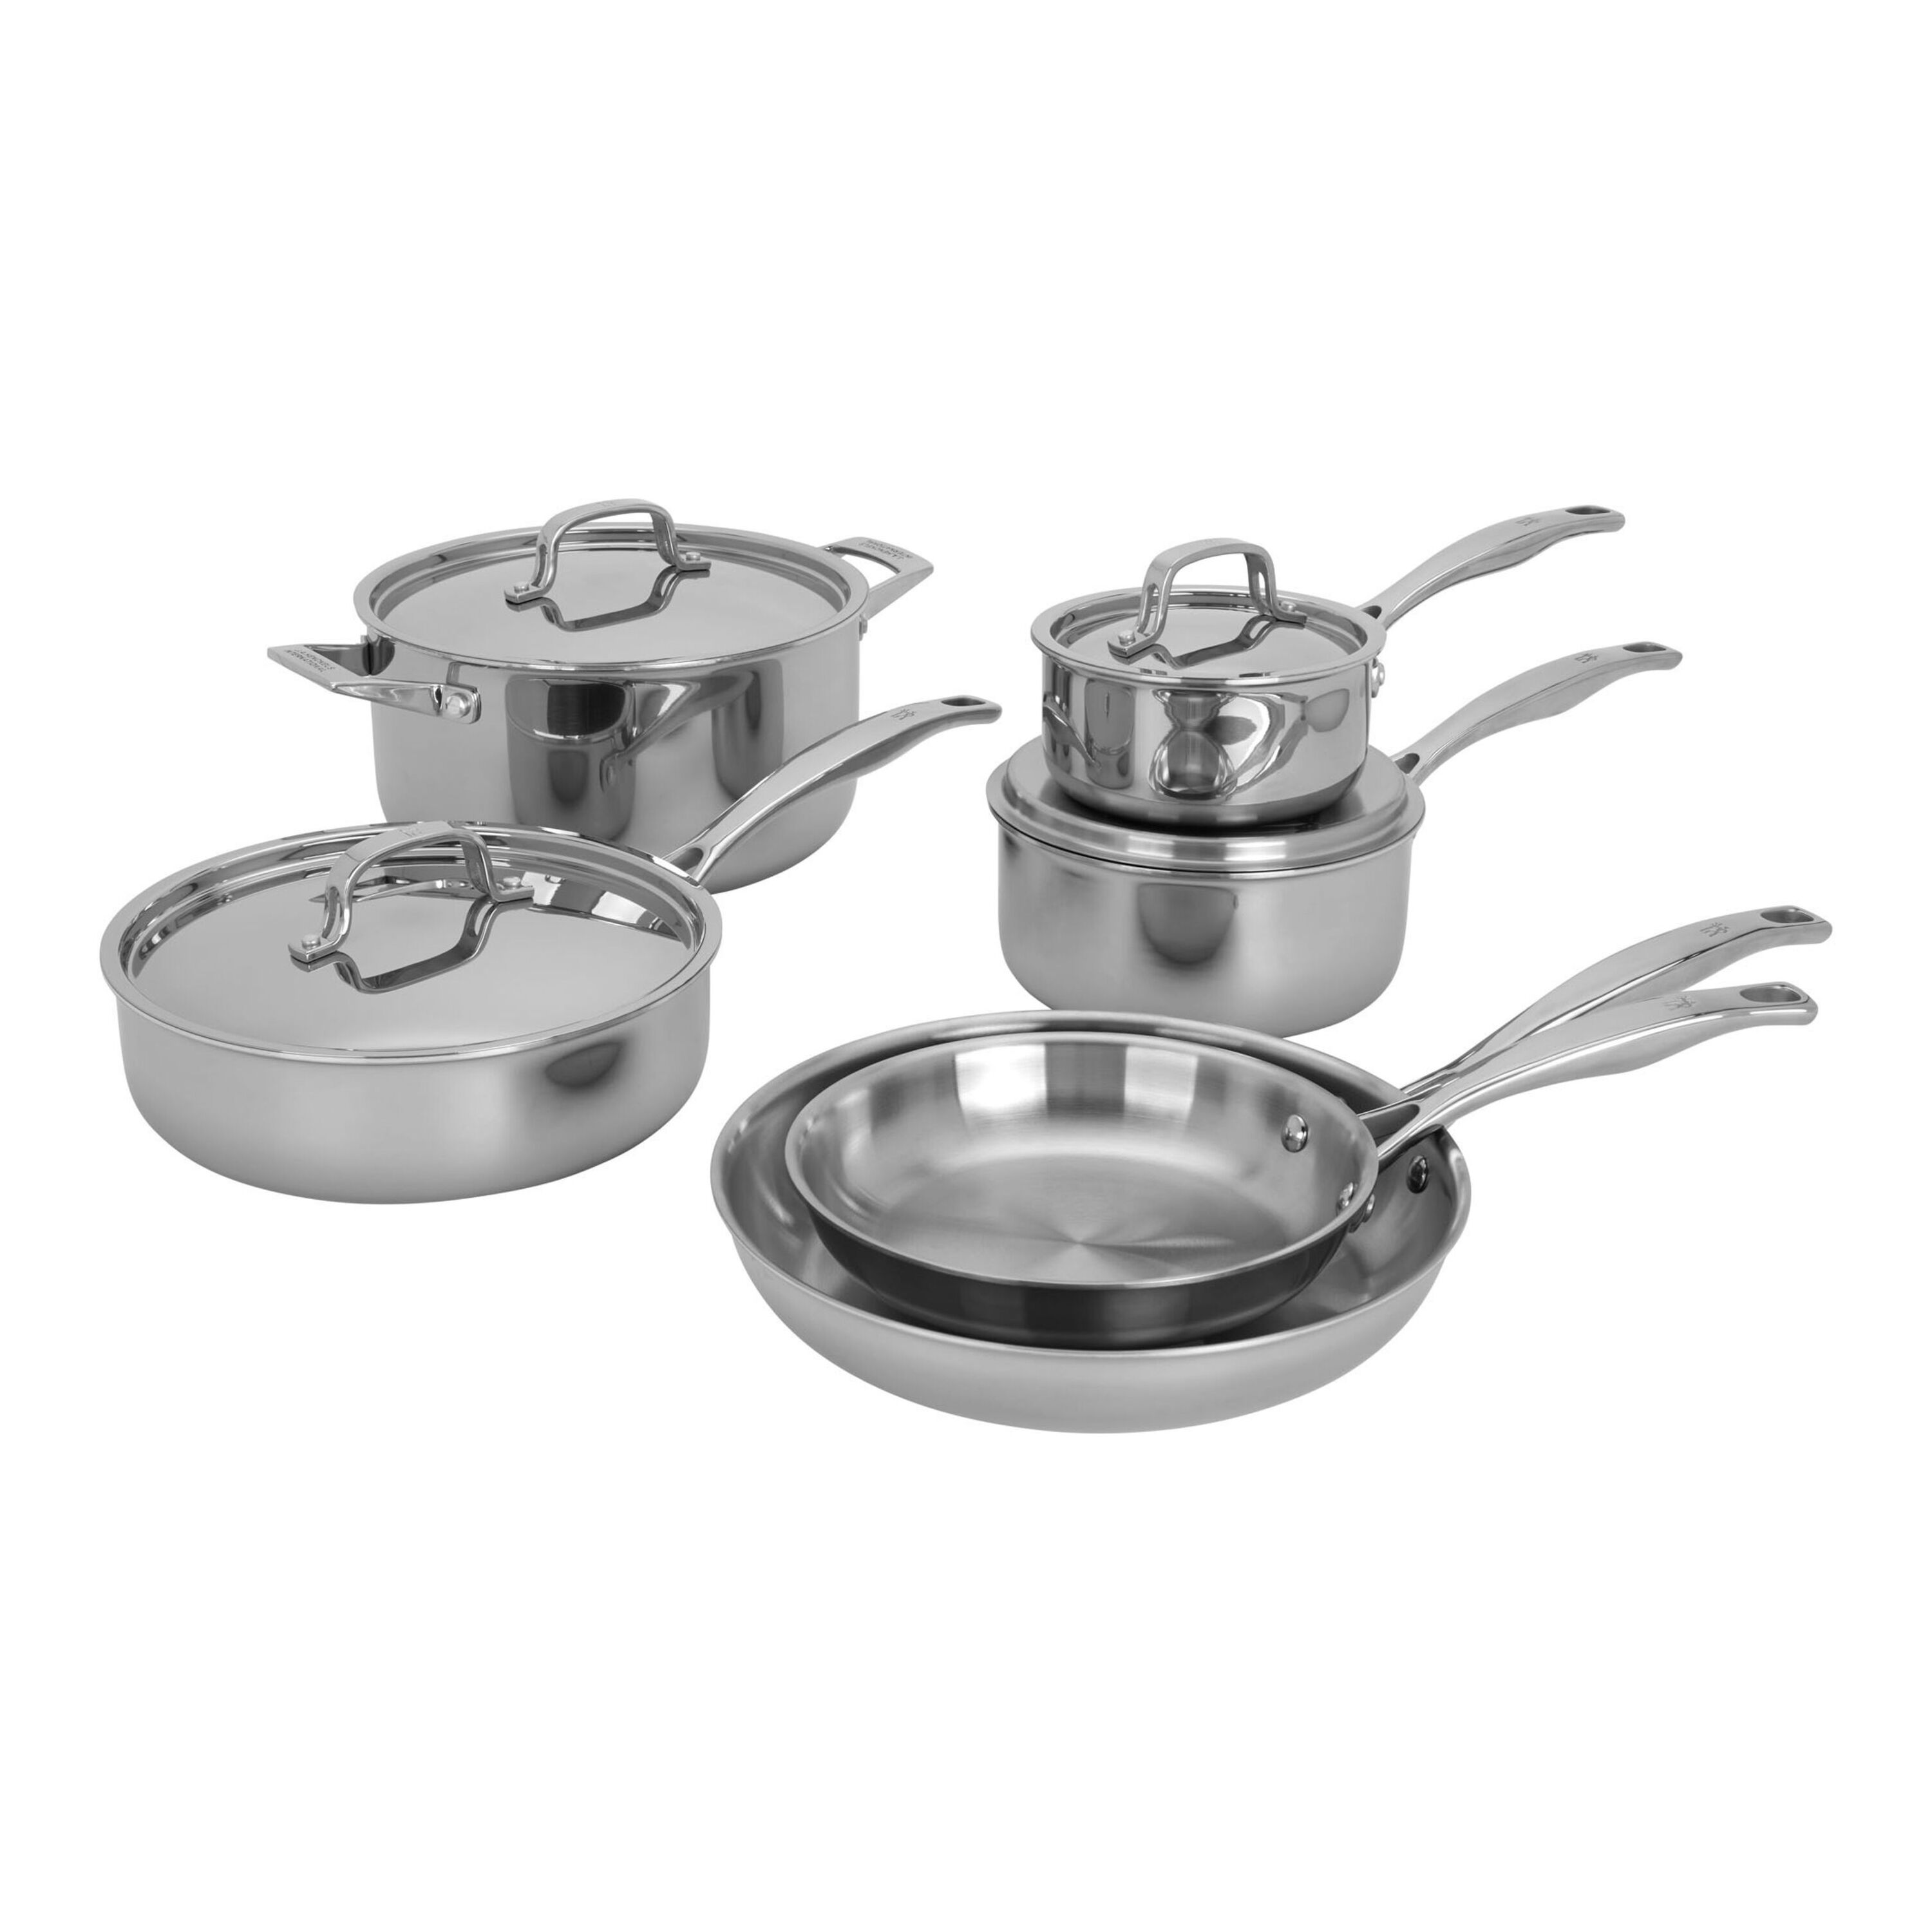 Zwilling Spirit 3-PLY Cookware Set - 10pc